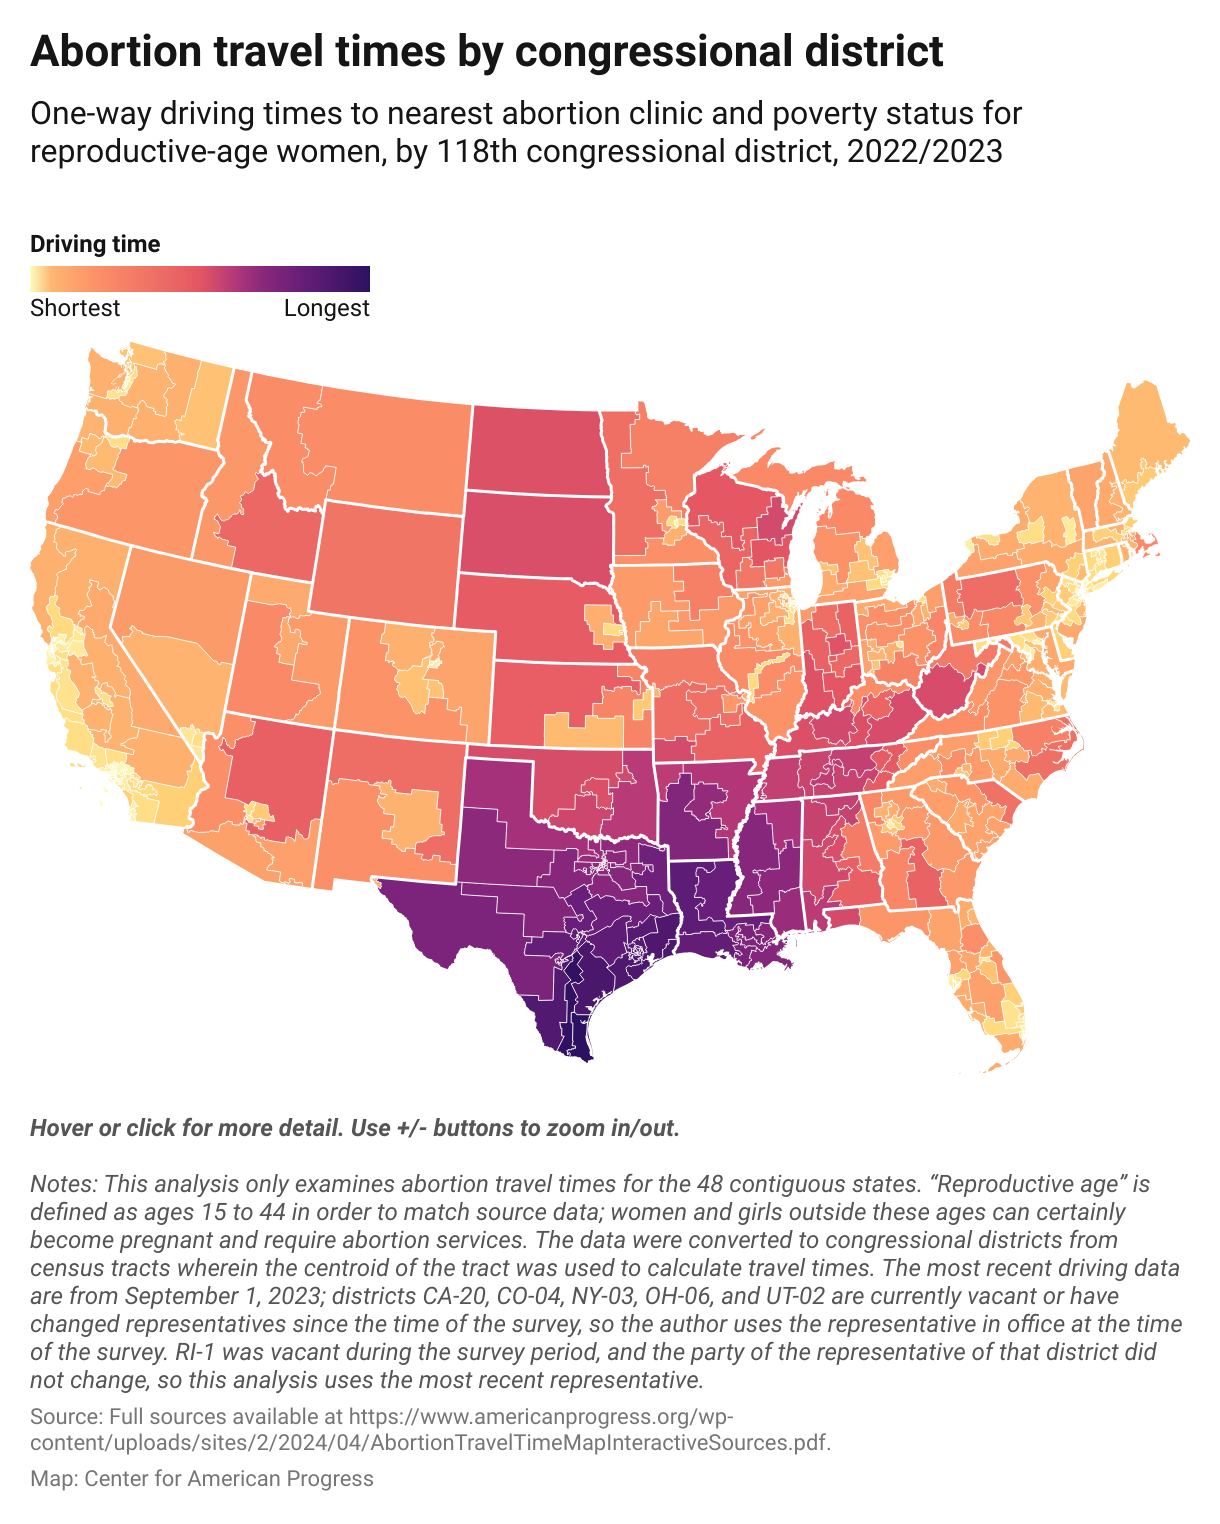 A choropleth heat map showing travel times for reproductive-aged women by congressional district. The longest drive times are concentrated in Texas, Louisiana, Mississippi, and Arkansas.